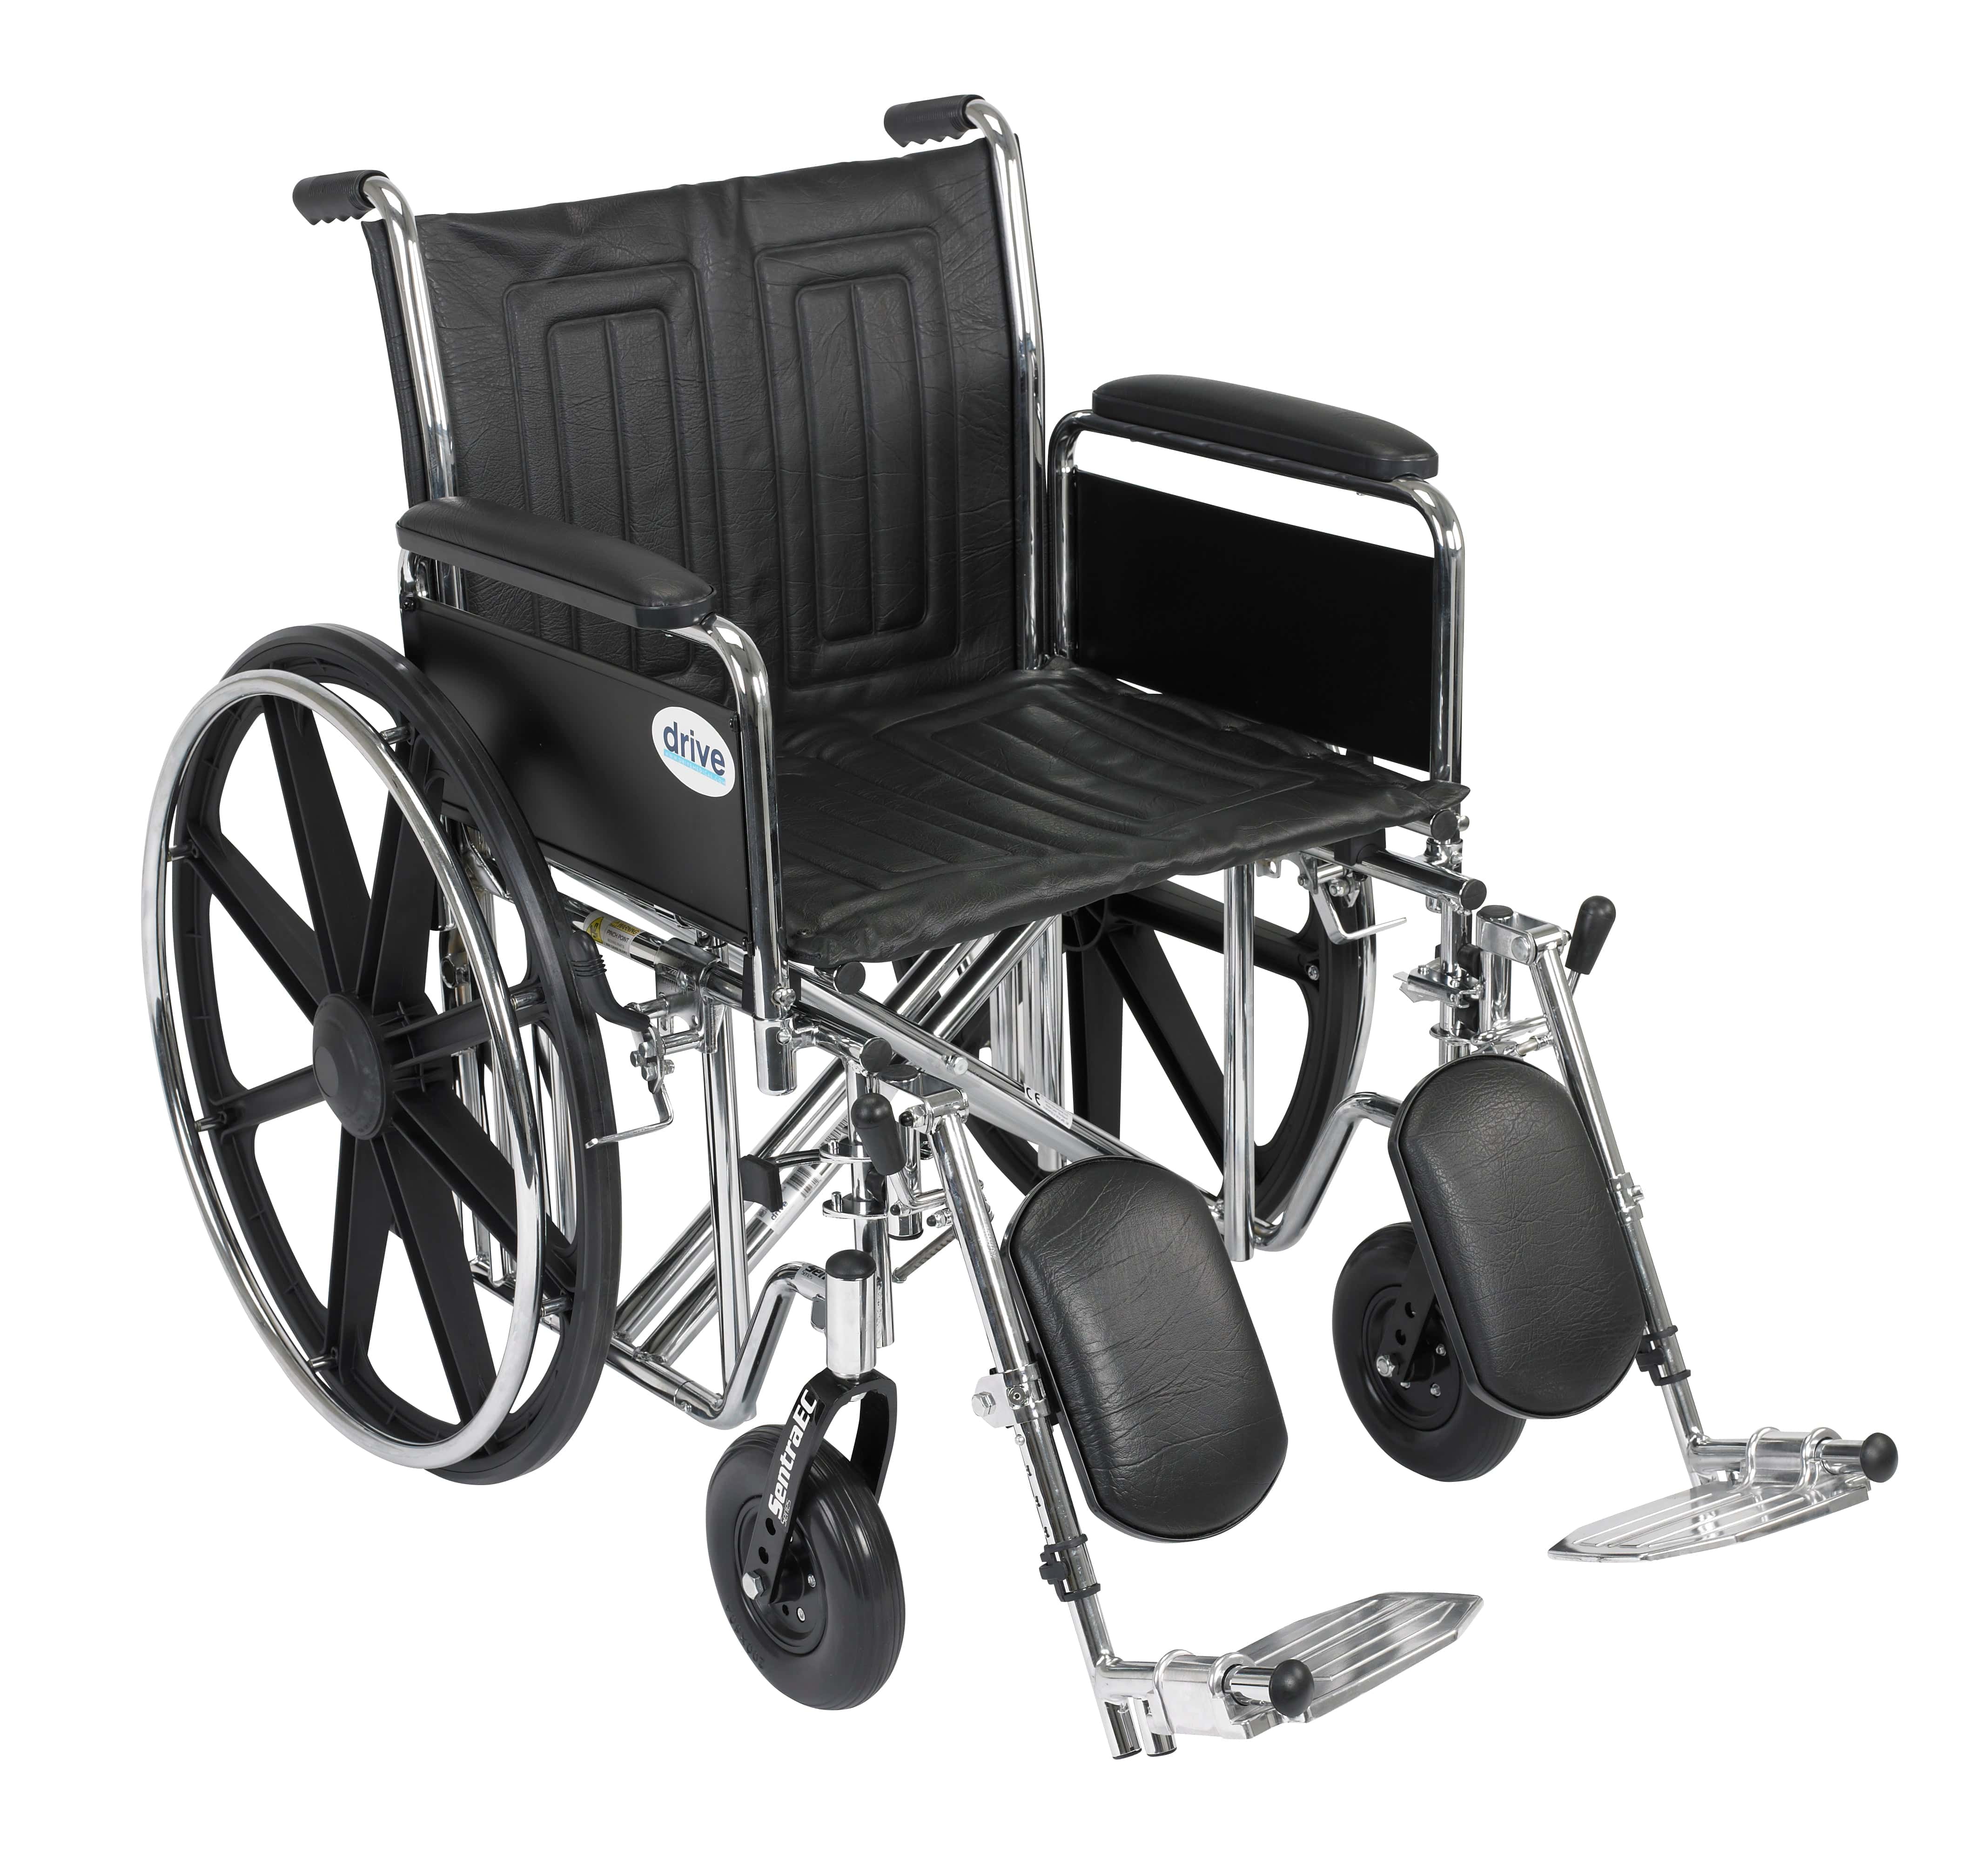 Drive Medical Wheelchairs Detachable Full Arms and Elevating Leg Rests / 20" Seat Drive Medical Sentra EC Heavy Duty Wheelchair